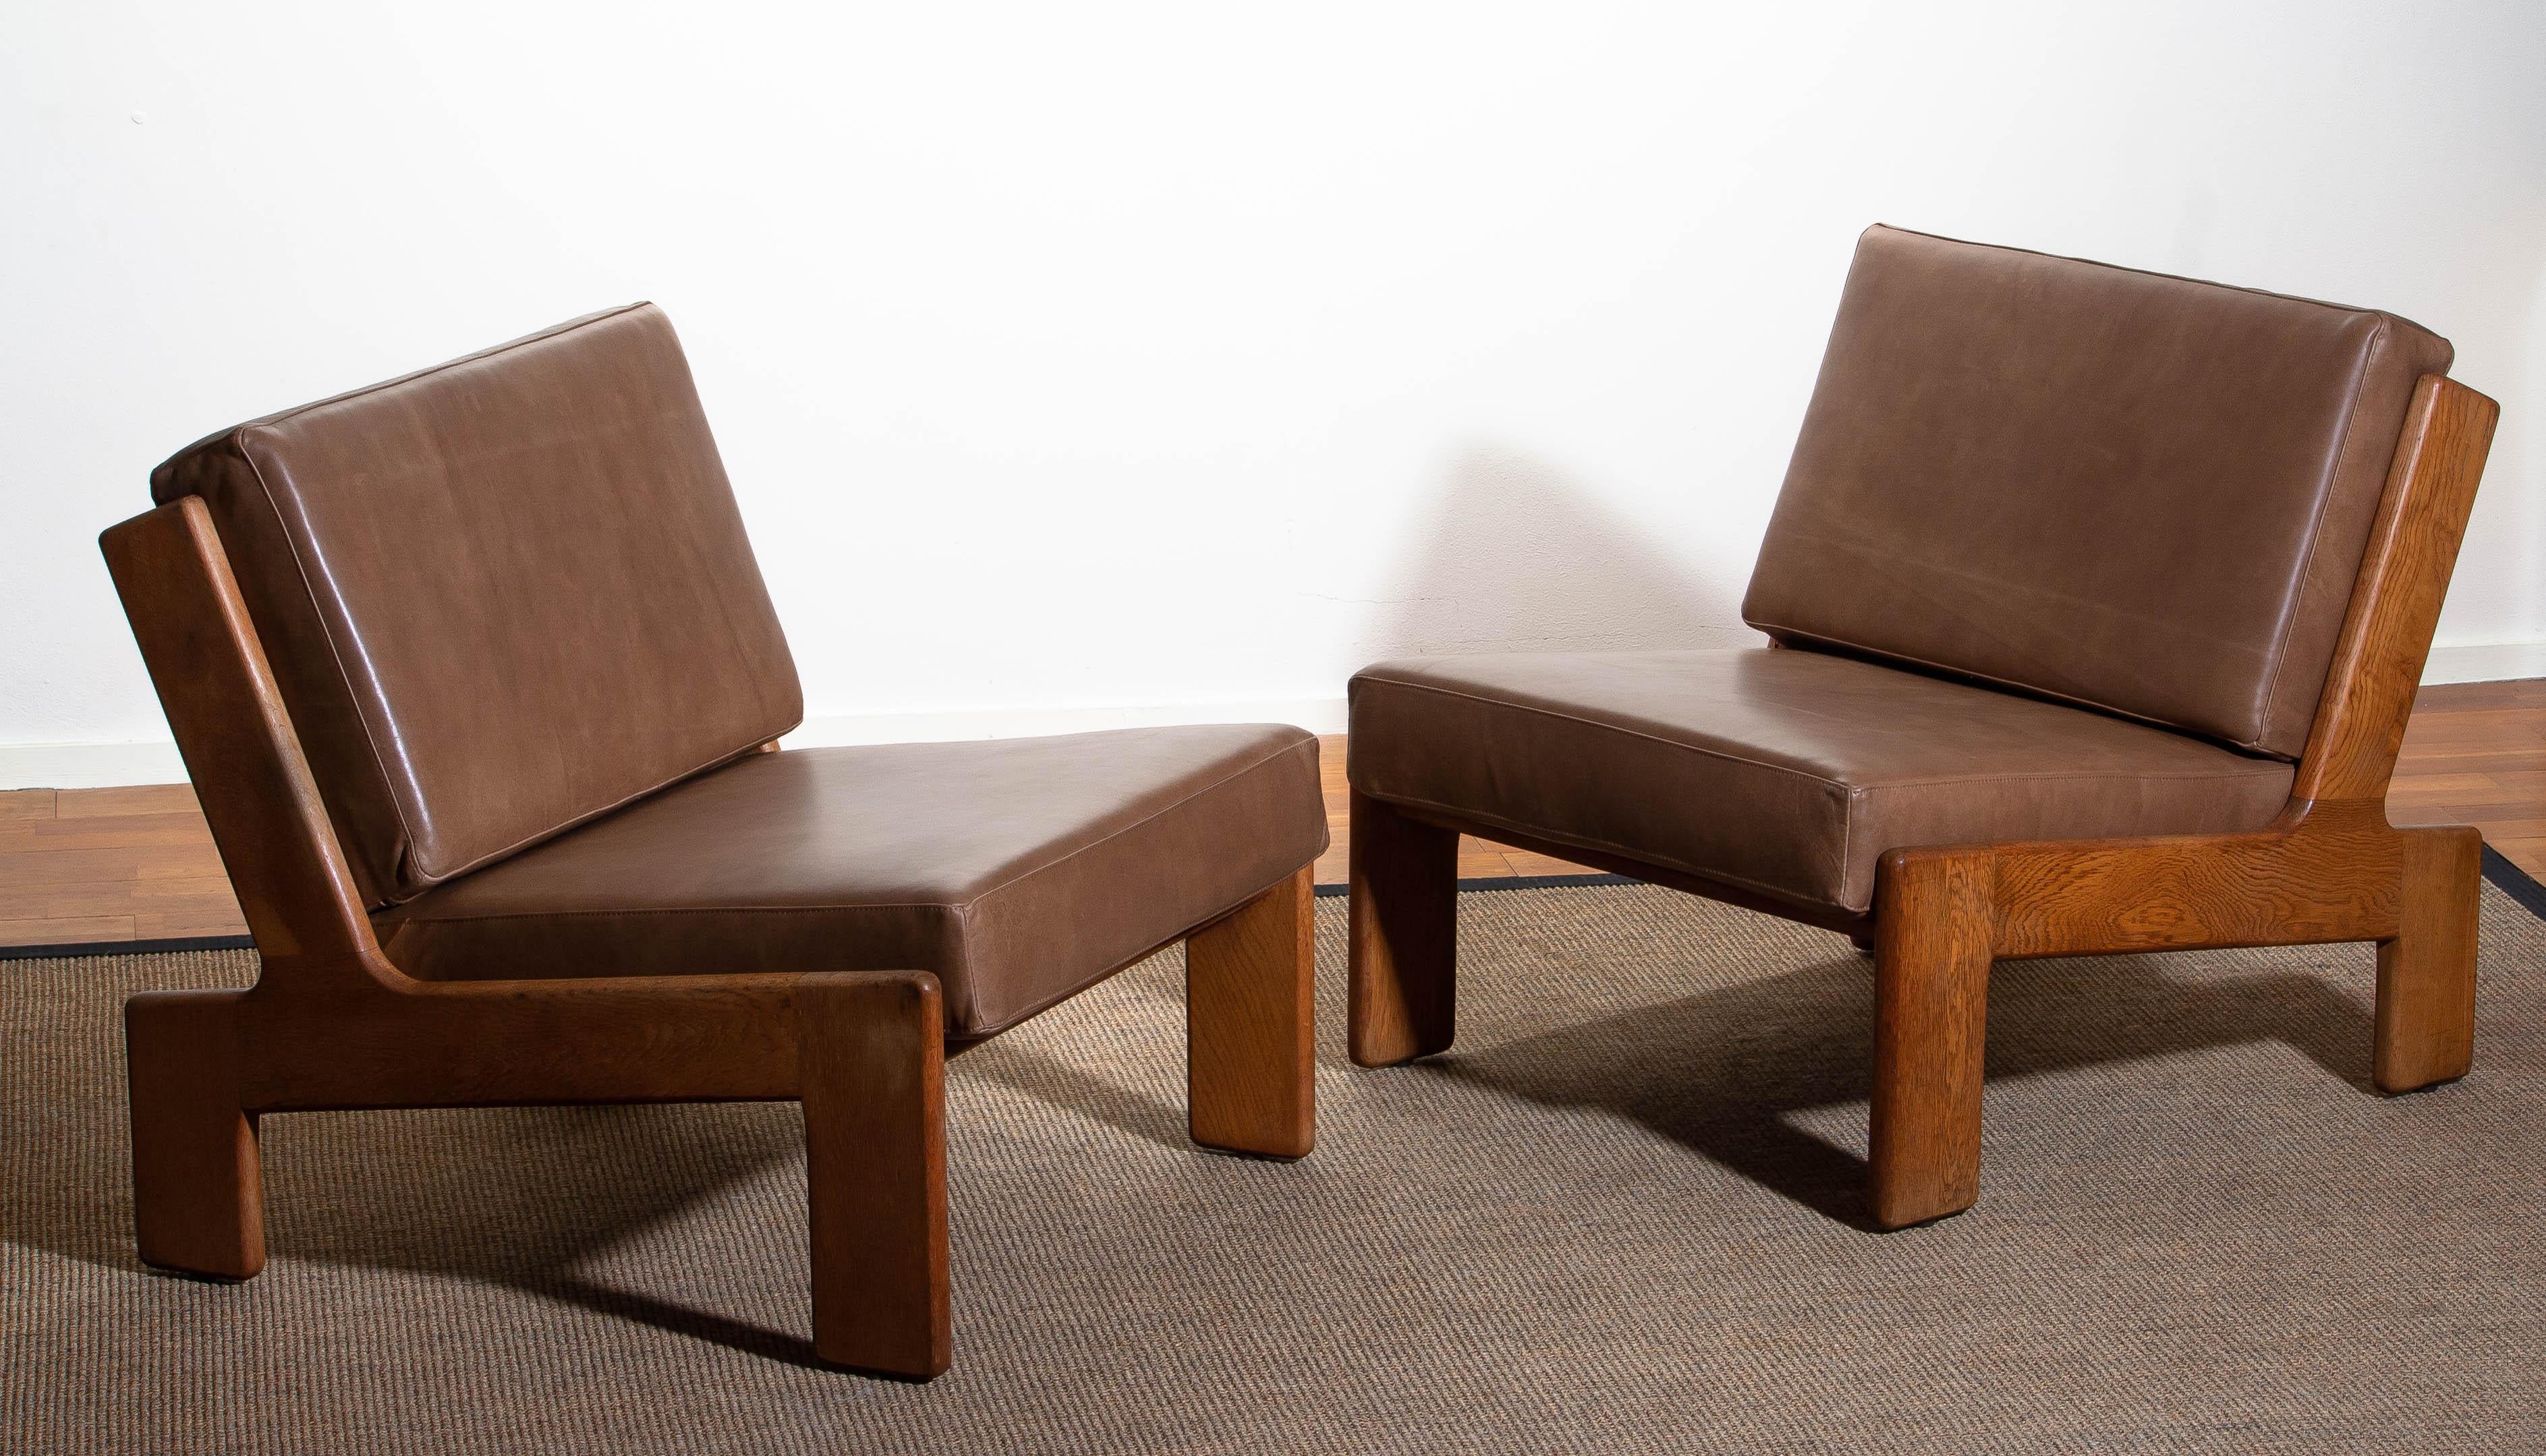 1960, Pair of Oak and Leather Cubist Lounge Chairs by Esko Pajamies for Asko 2